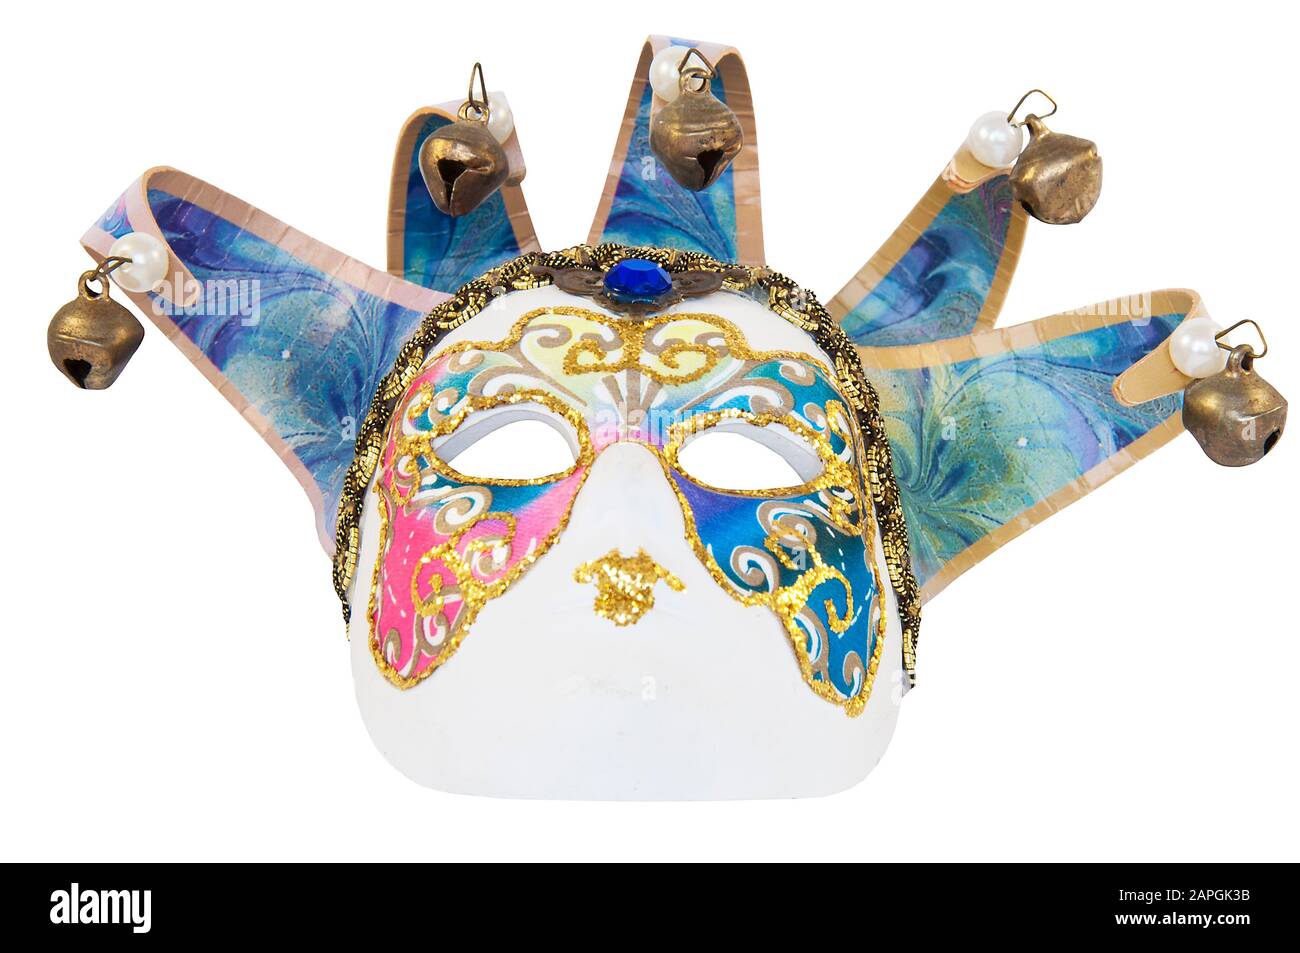 Venetian theatrical mask on a white background Stock Photo